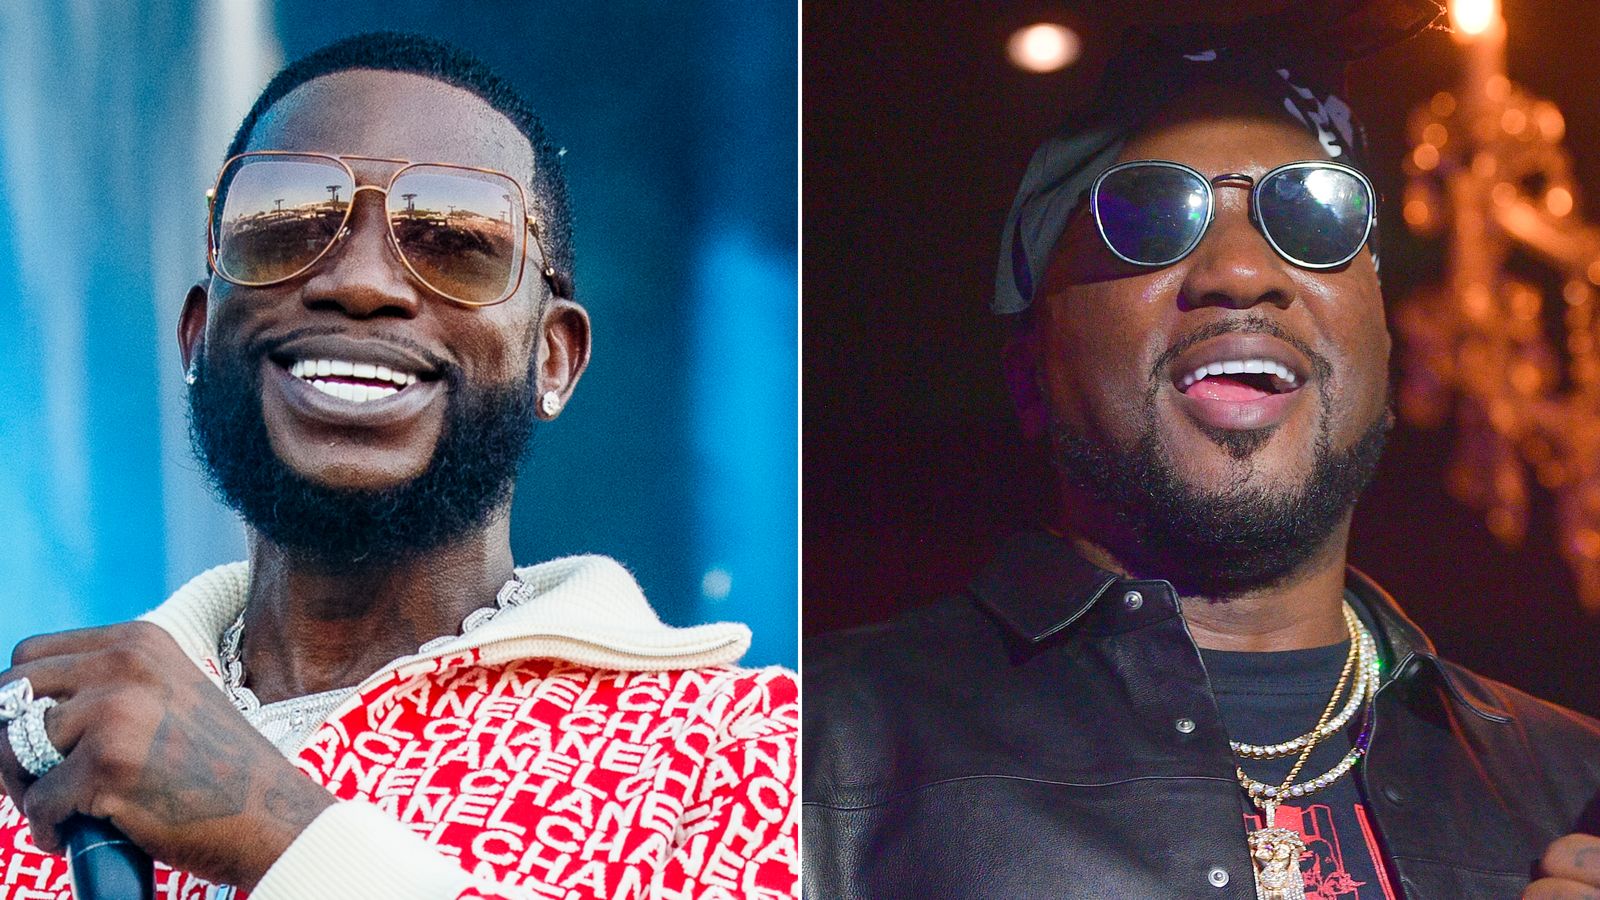 Rappers Gucci Mane and Jeezy Verzuz battle ends peacefully